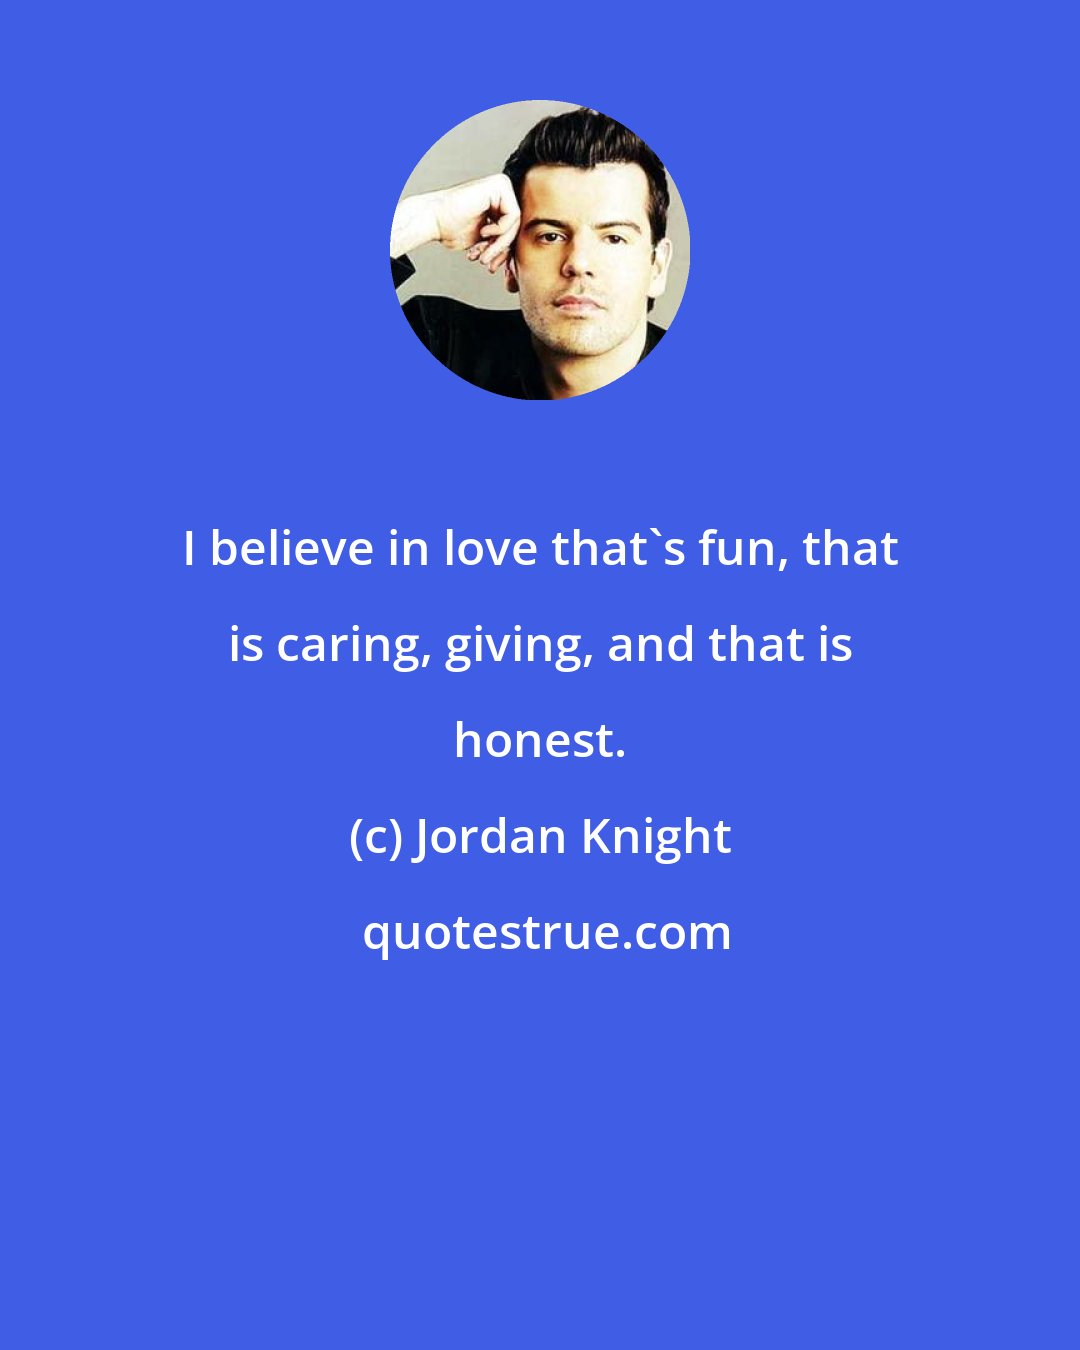 Jordan Knight: I believe in love that's fun, that is caring, giving, and that is honest.